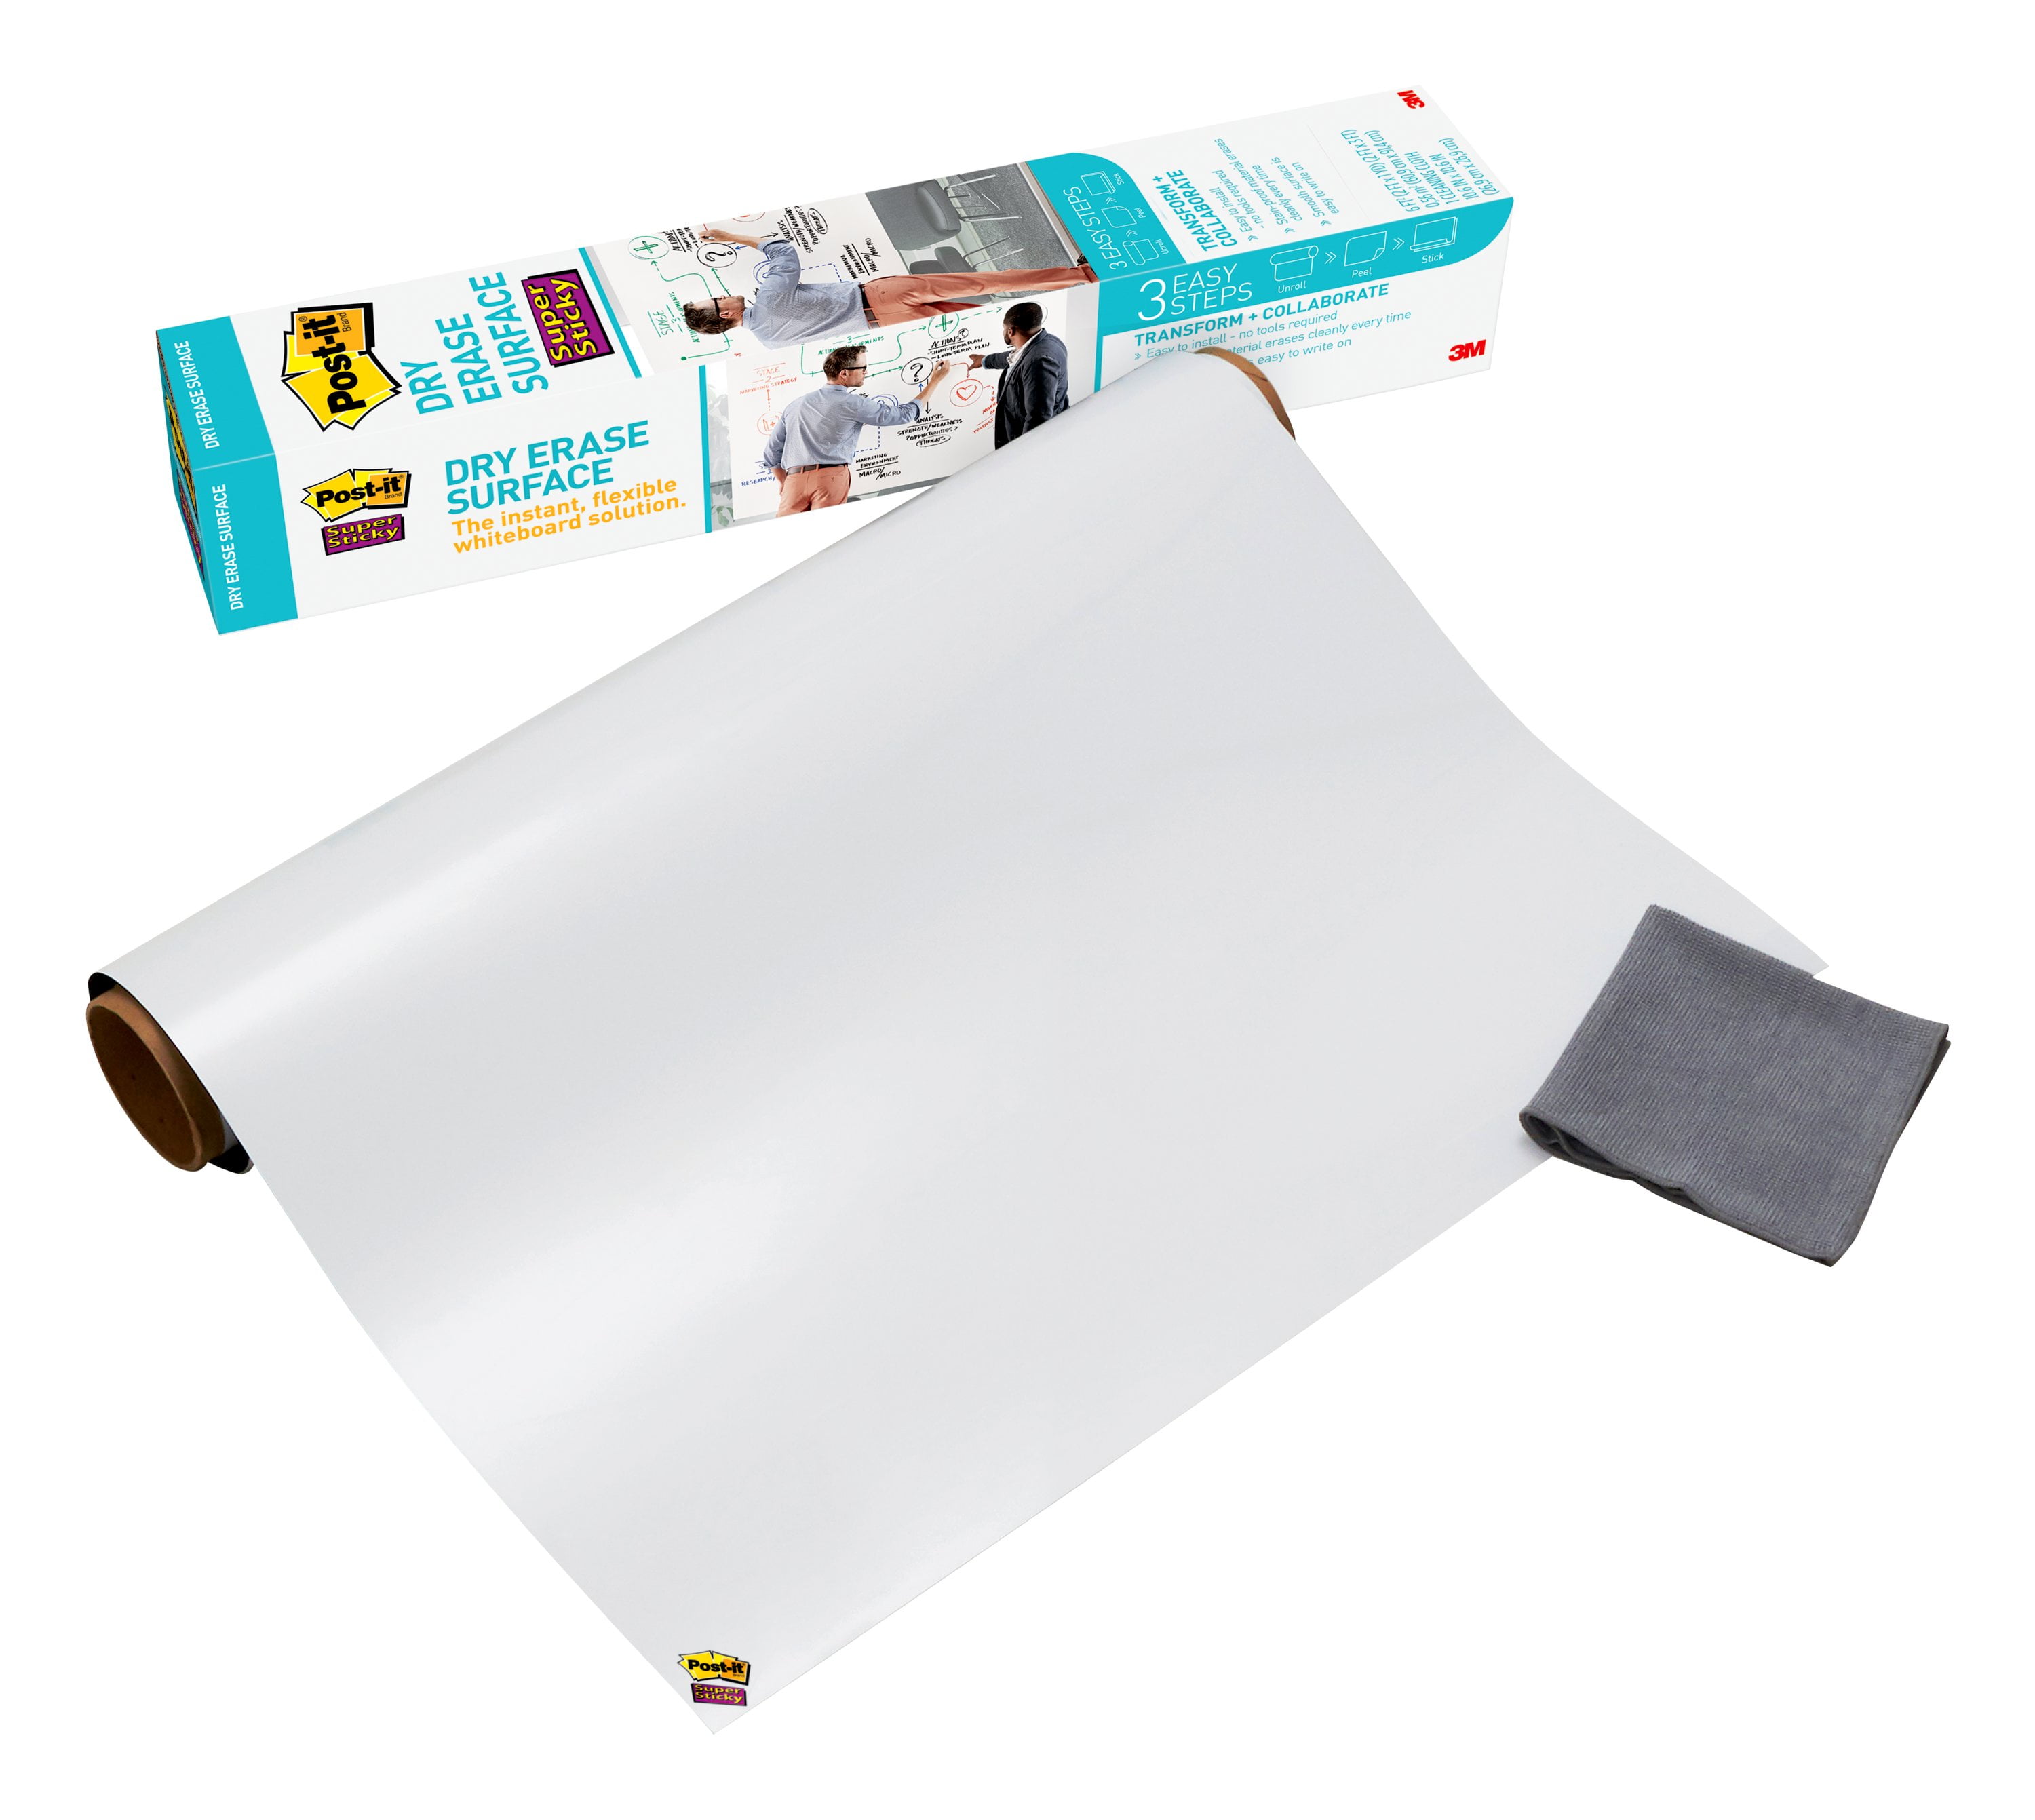 Great for Tables Post-it Dry Erase Surface 6 ft x 4 ft Desks and Other by 